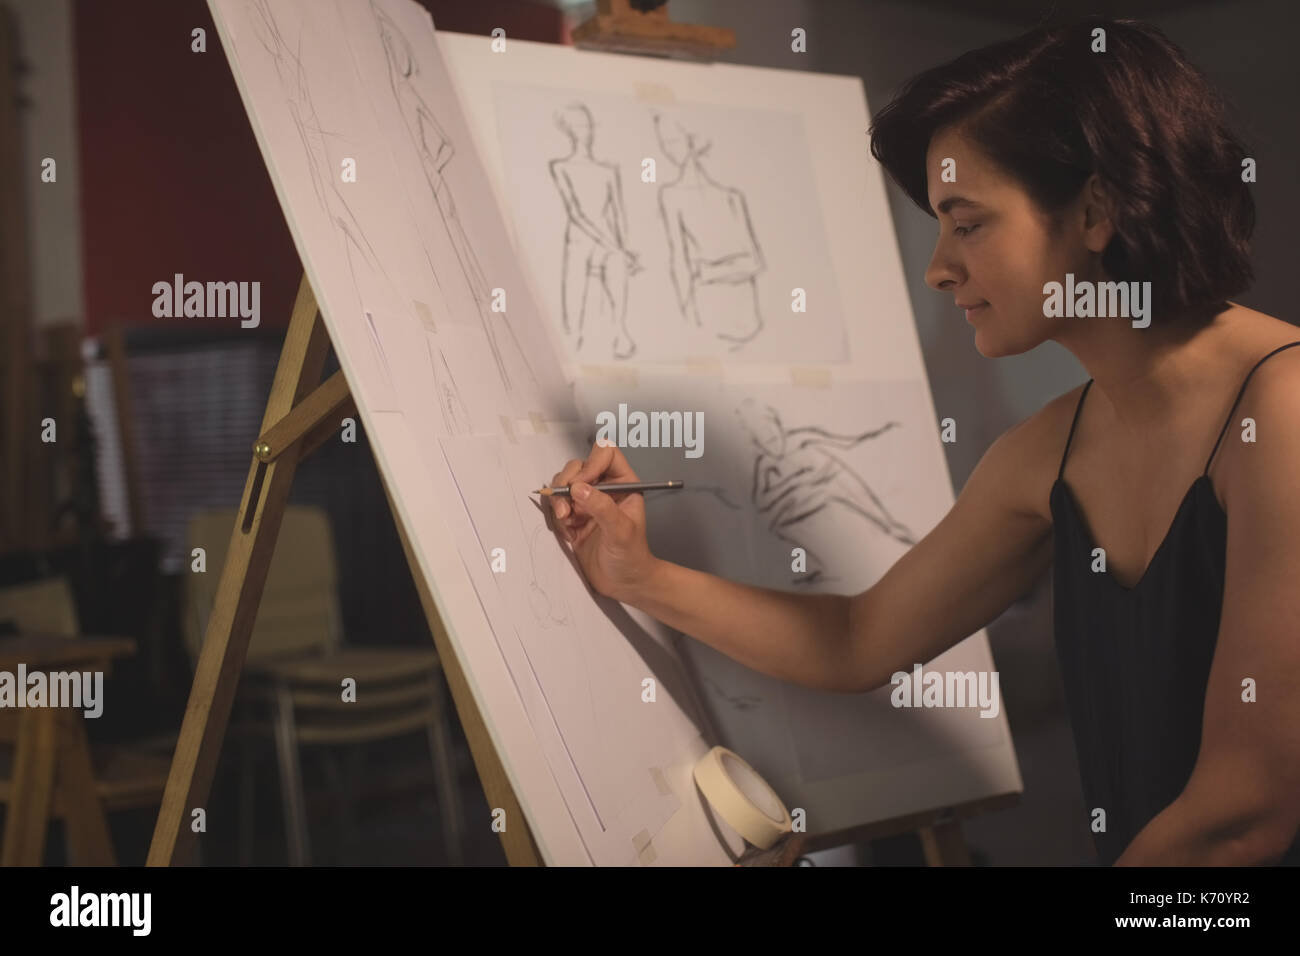 Female artist drawing a sketch on canvas in art studio Stock Photo